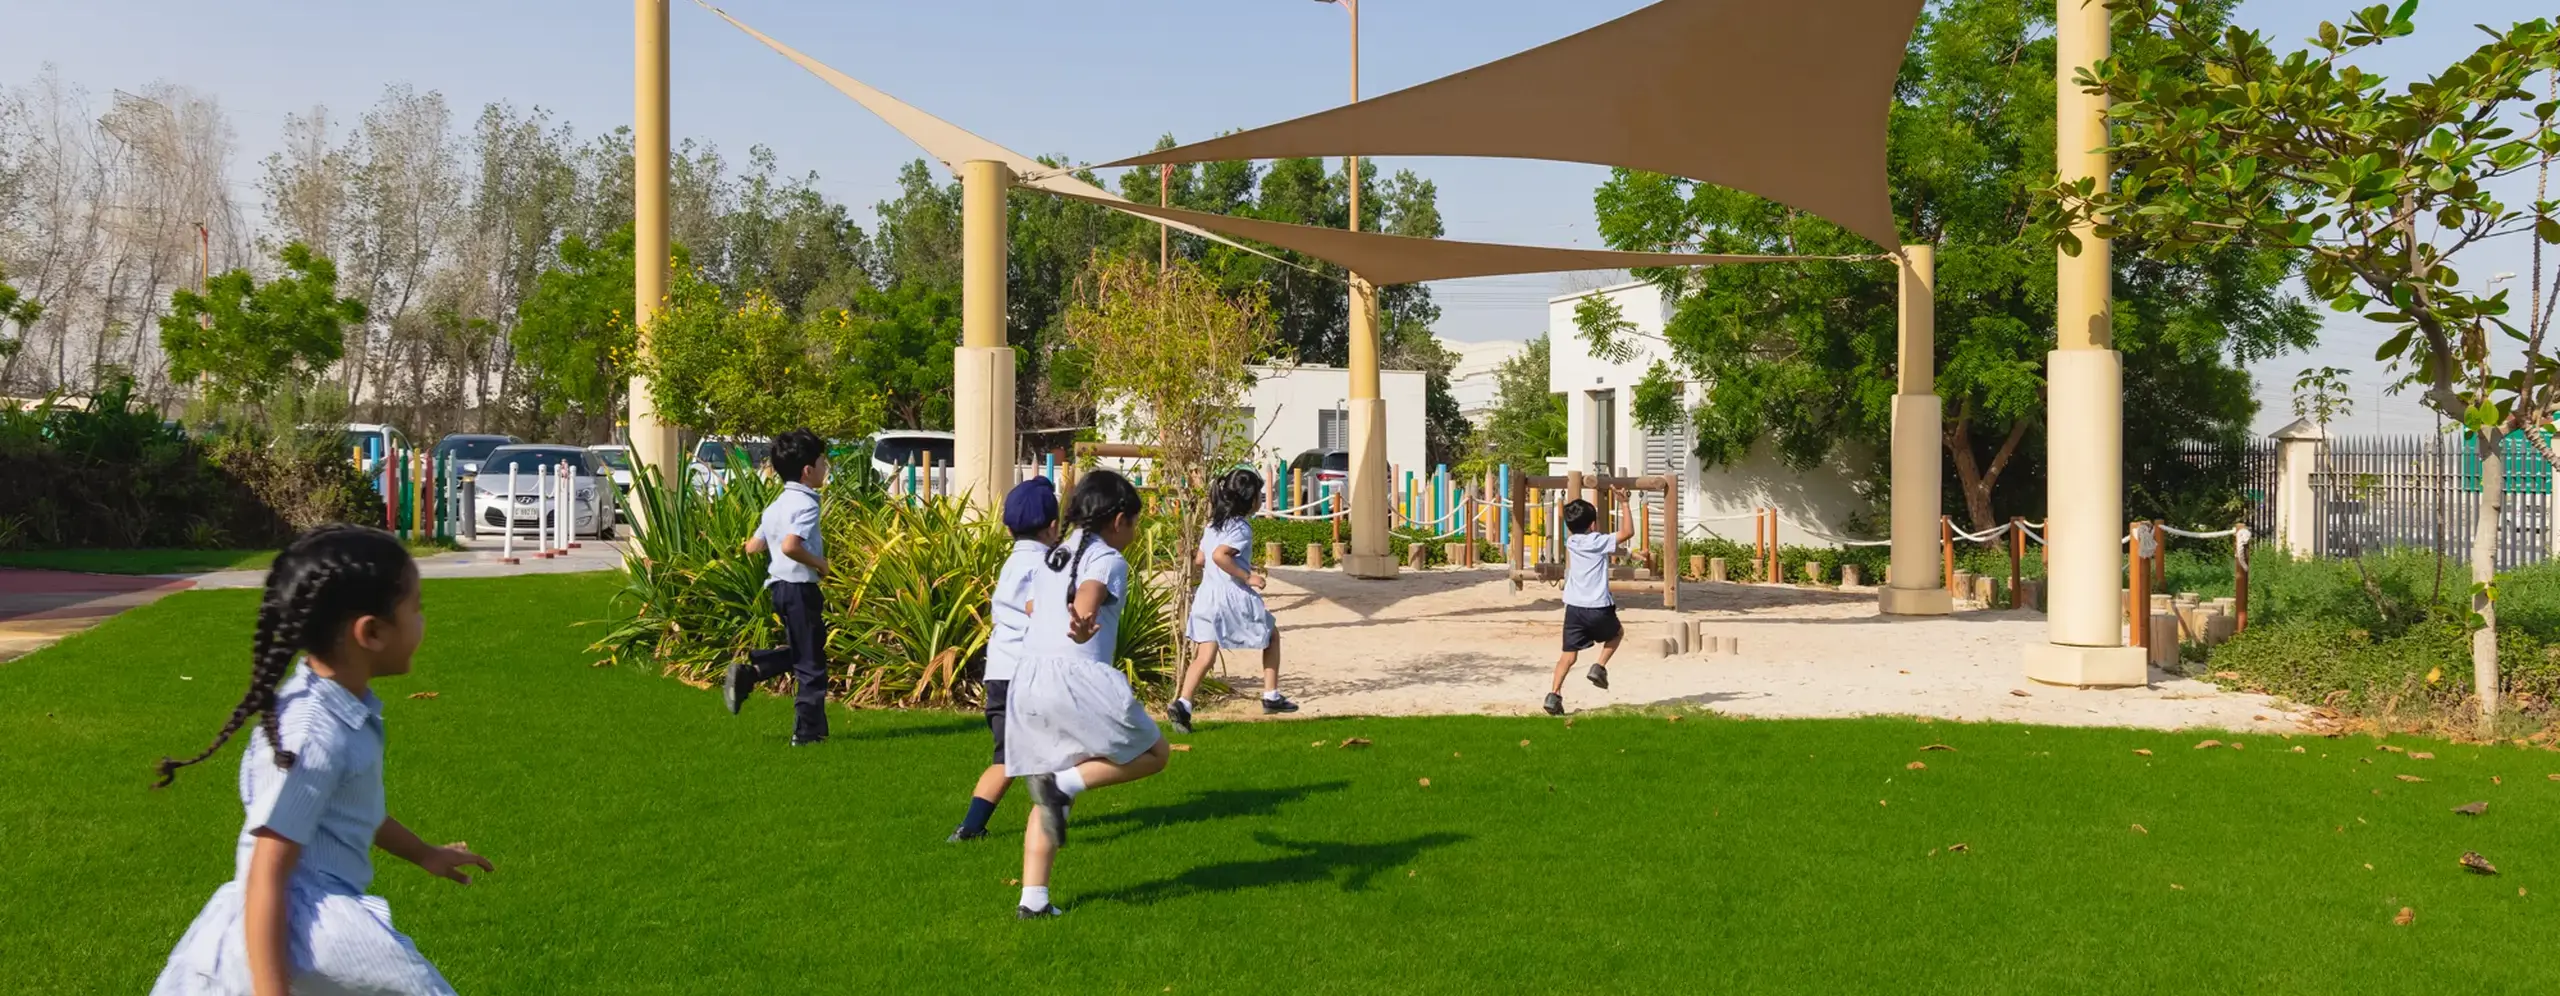 Young students running towards a building from the playground.